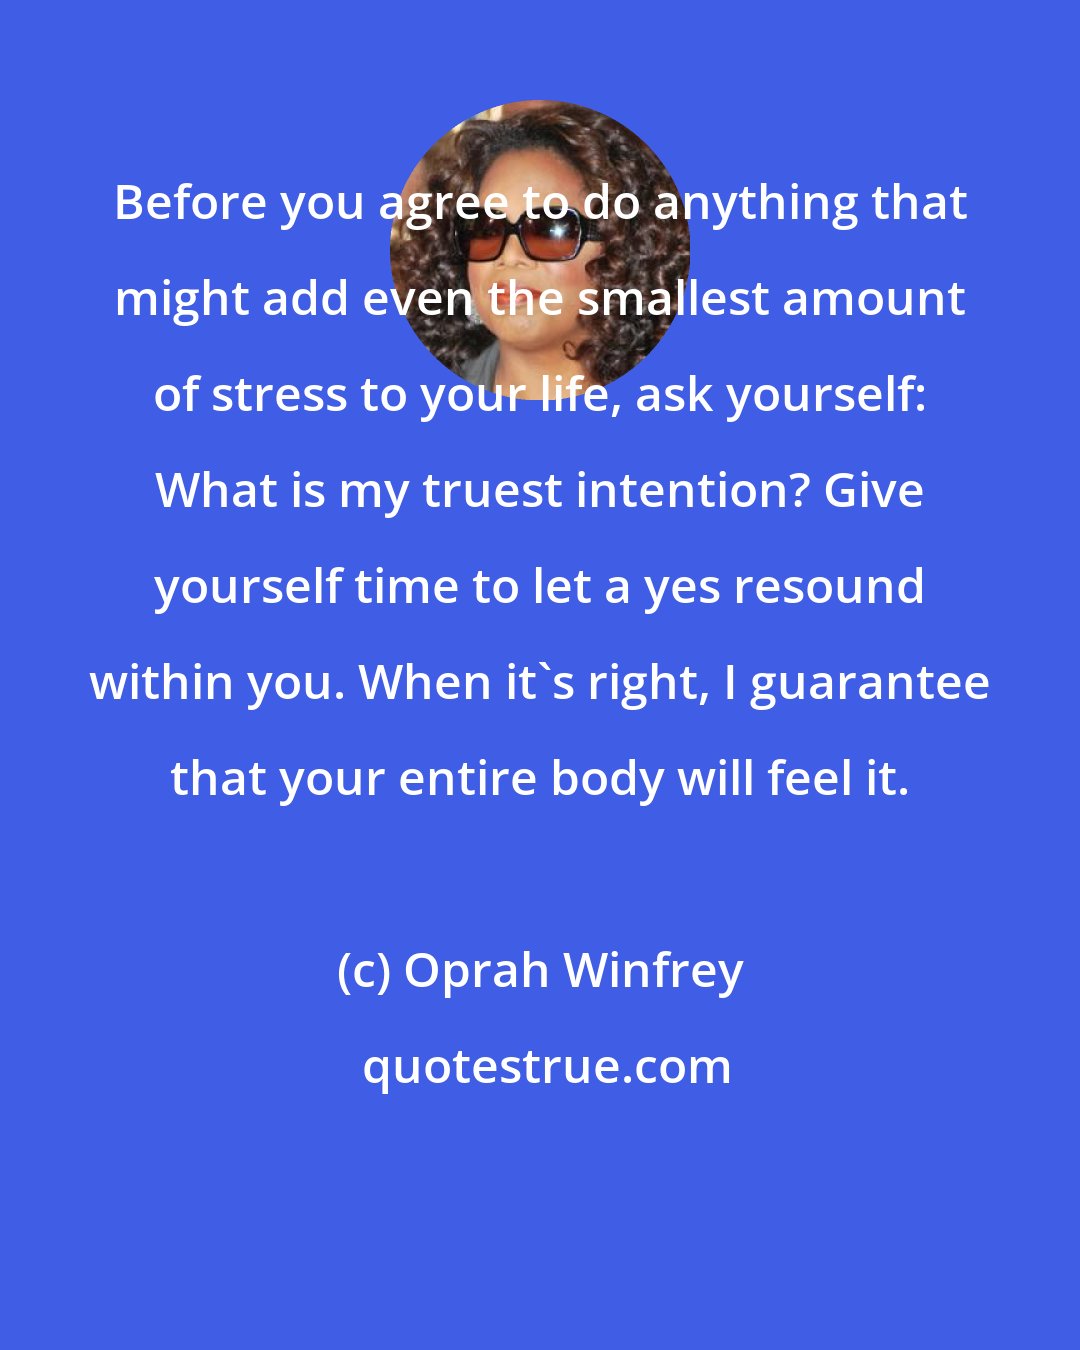 Oprah Winfrey: Before you agree to do anything that might add even the smallest amount of stress to your life, ask yourself: What is my truest intention? Give yourself time to let a yes resound within you. When it's right, I guarantee that your entire body will feel it.